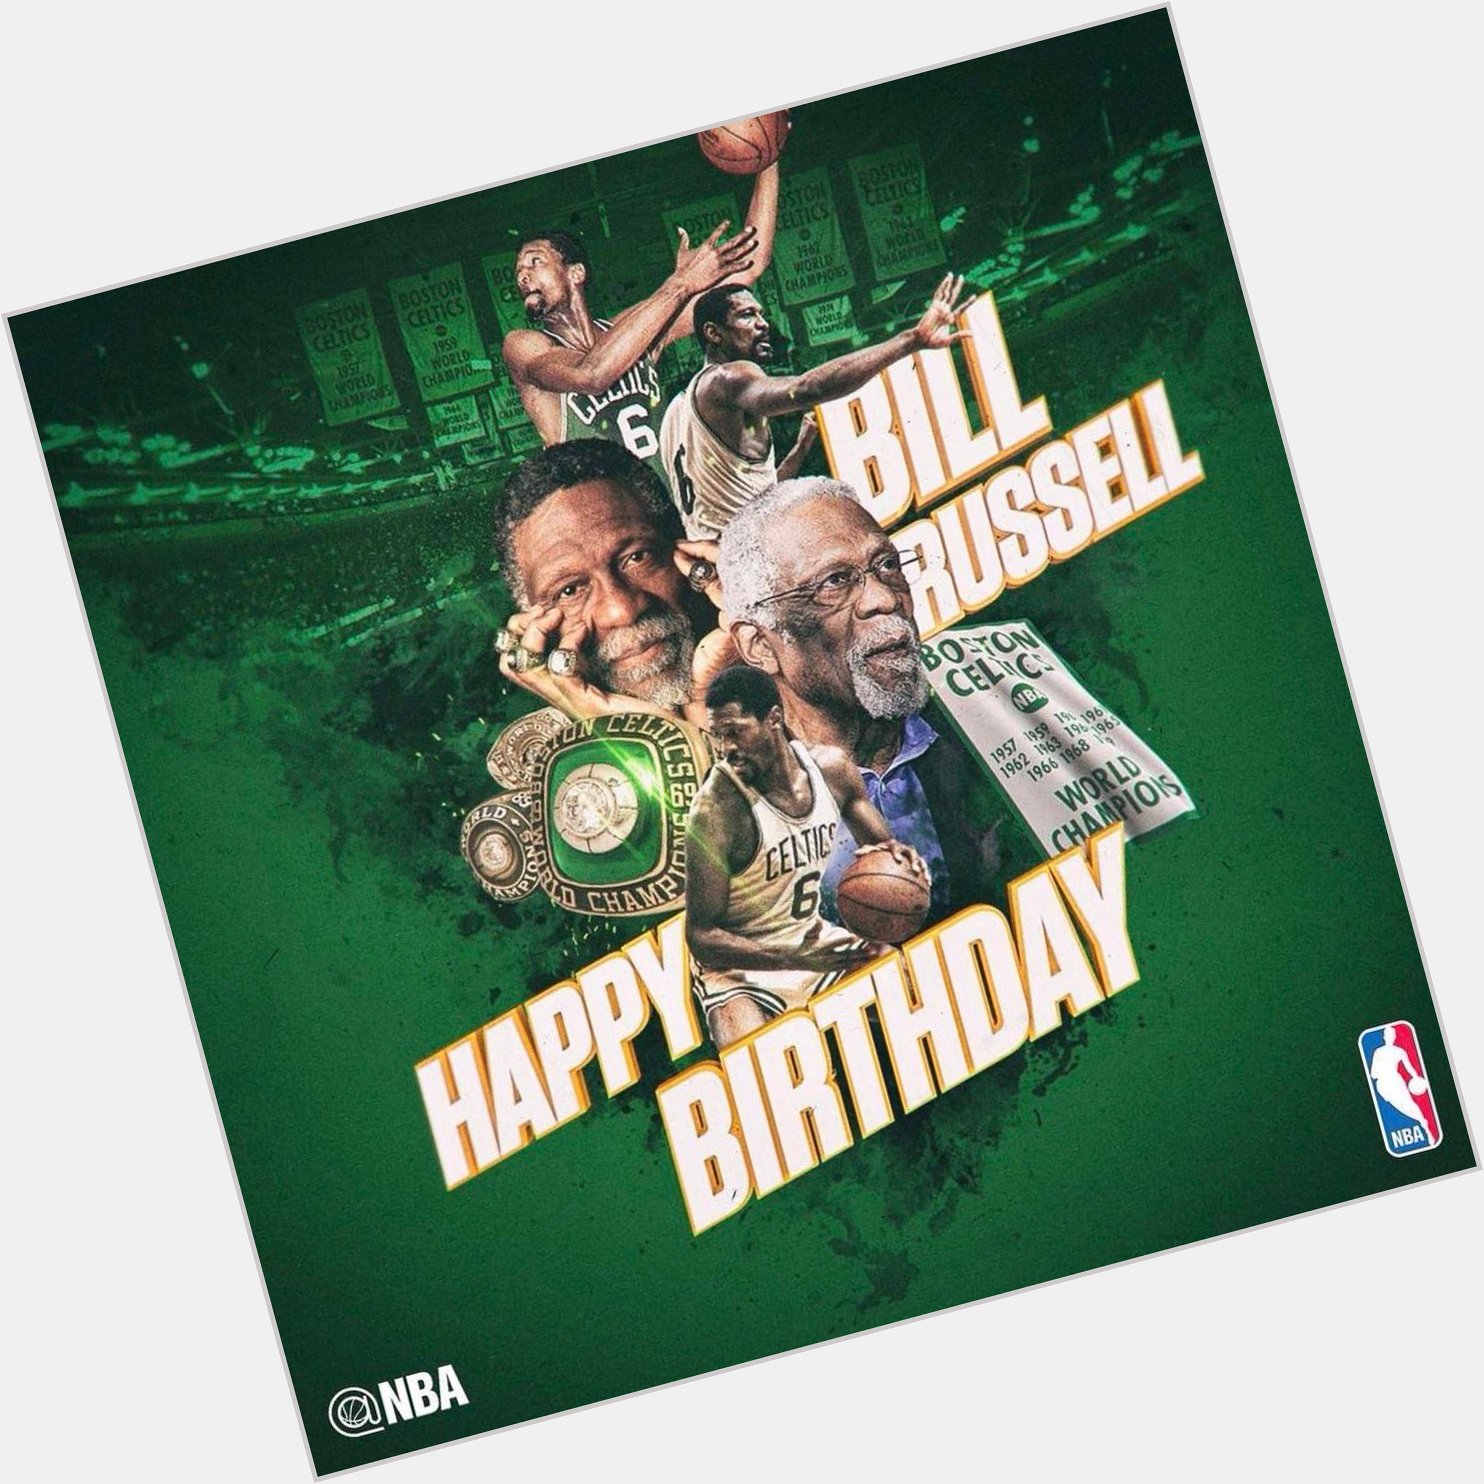 Happy Birthday to the winningest player in basketball Bill Russell! Where do you rank Bill Russell all-time? 